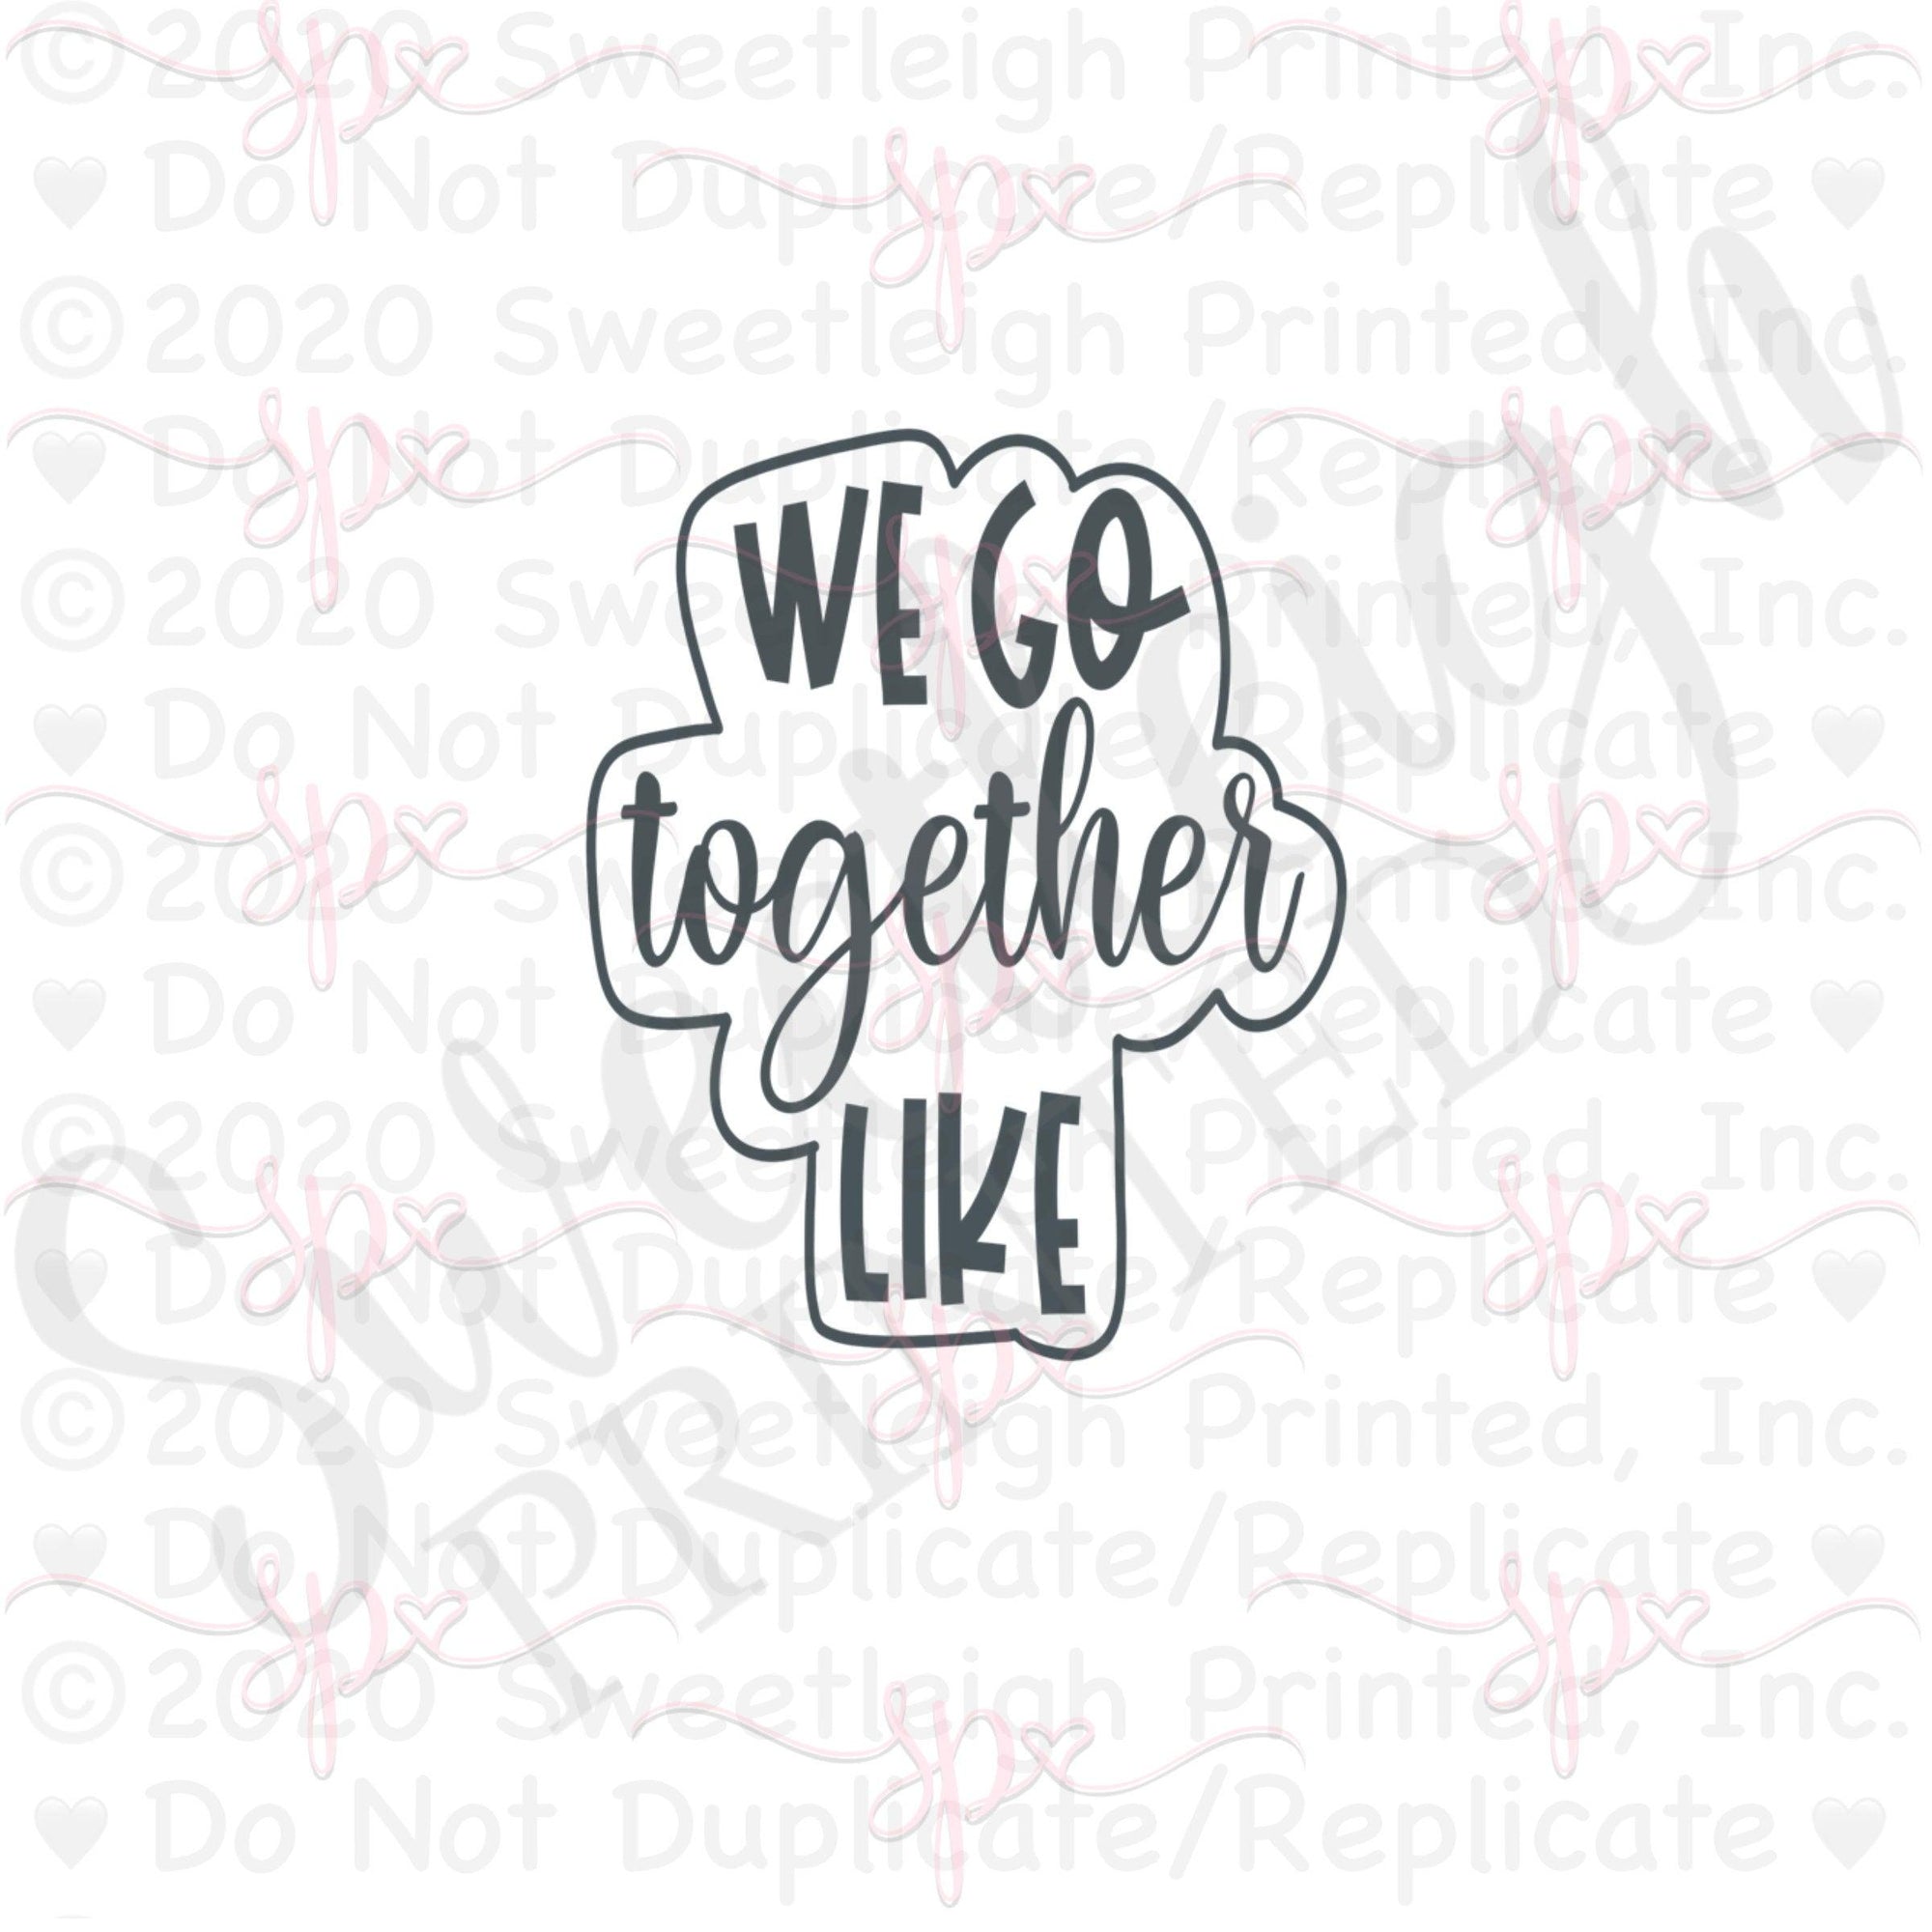 TALL We Go Together Like Hand Lettered Cookie Cutter - Sweetleigh 